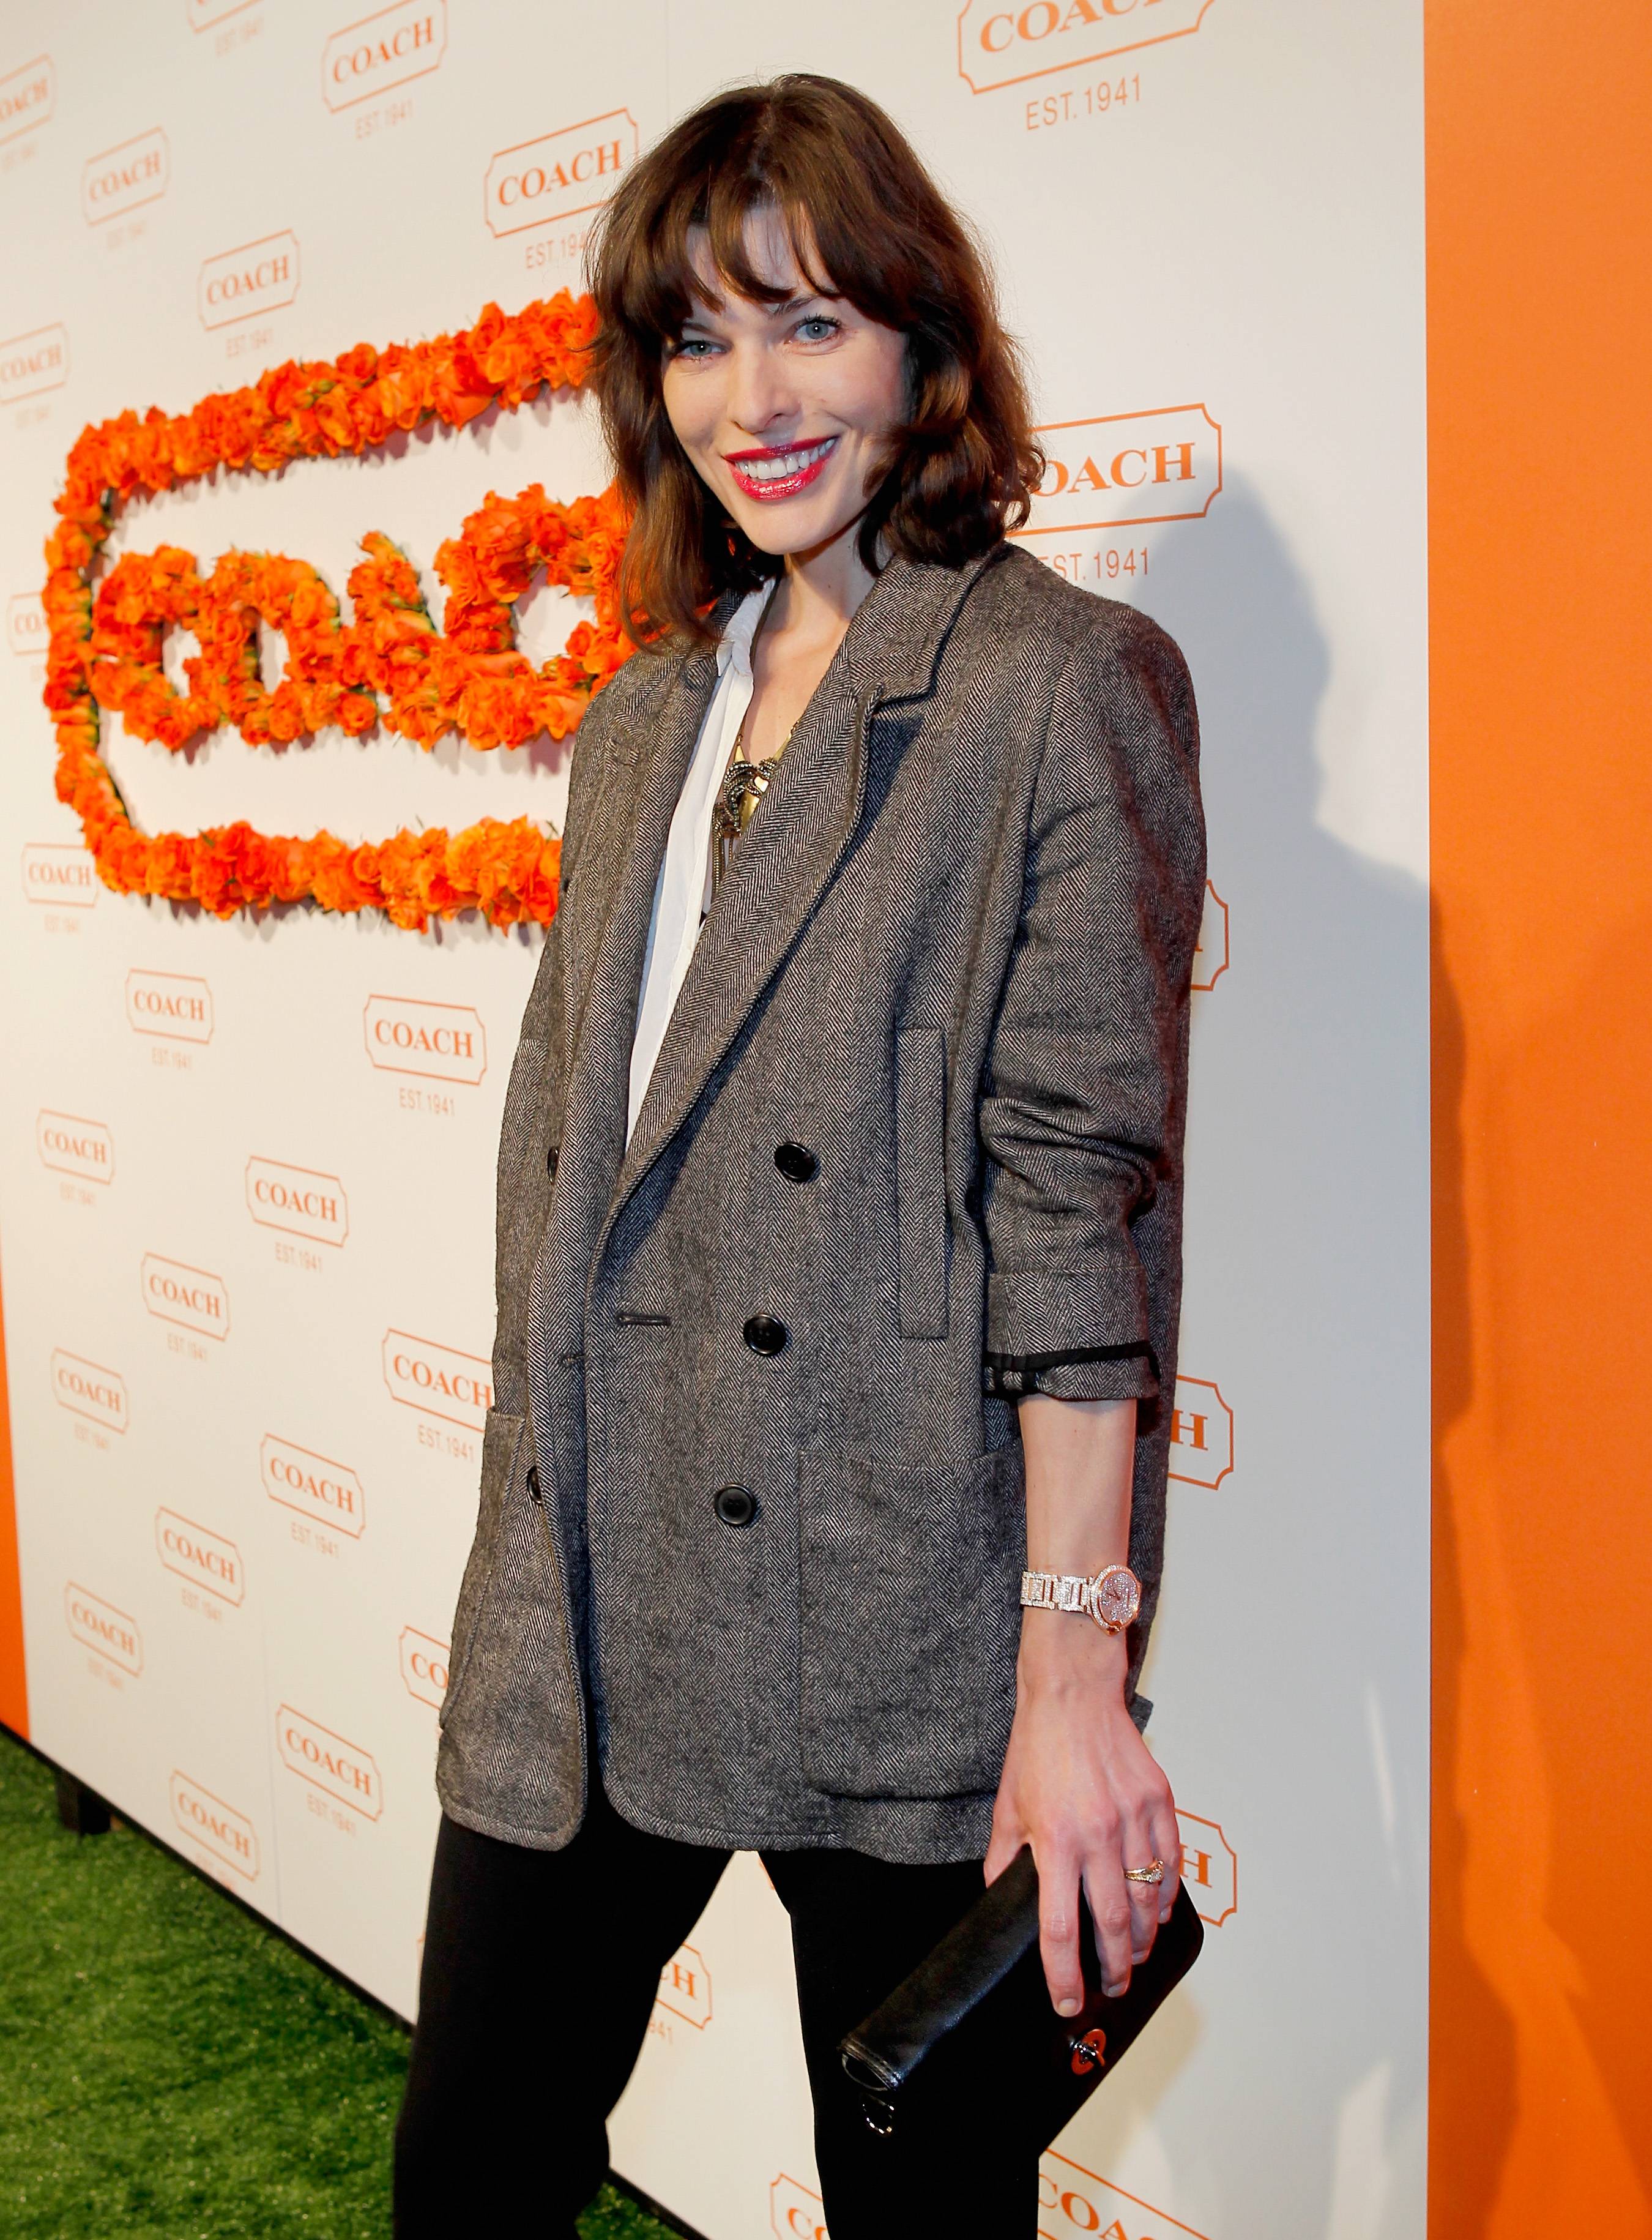 Coach 3rd Annual Evening Of Cocktails And Shopping To Benefit The Children's Defense Fund Hosted By Katie McGrath, J.J. Abrams and Bryan Burk